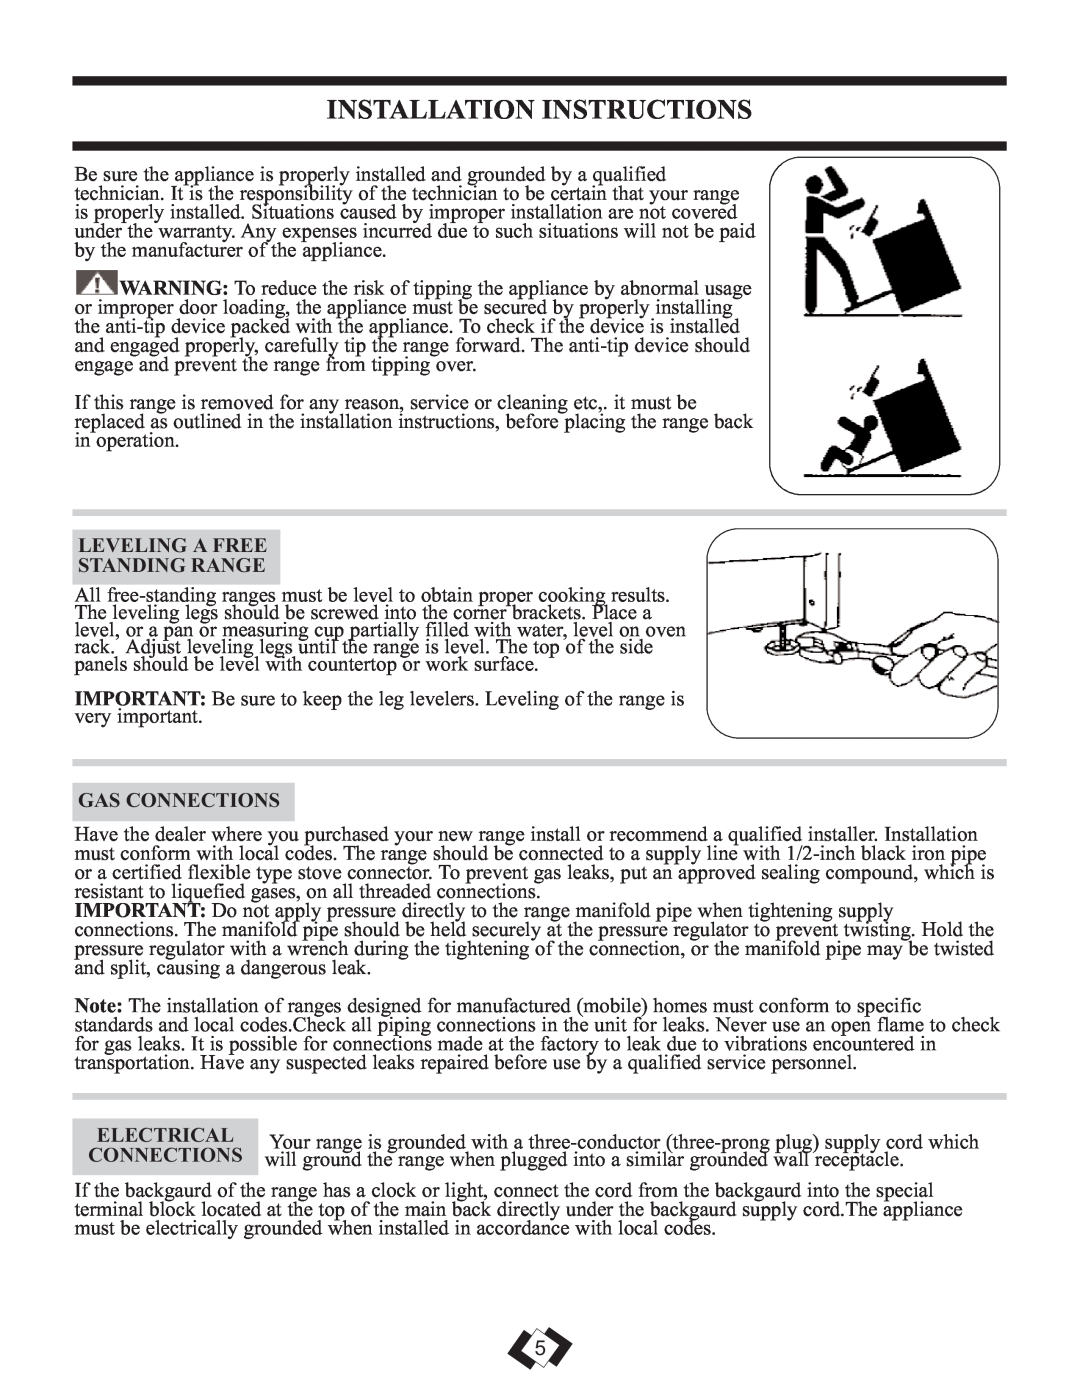 Danby DR2099BLGLP, DR2099WGLP Installation Instructions, Leveling A Free Standing Range, Gas Connections, Electrical 